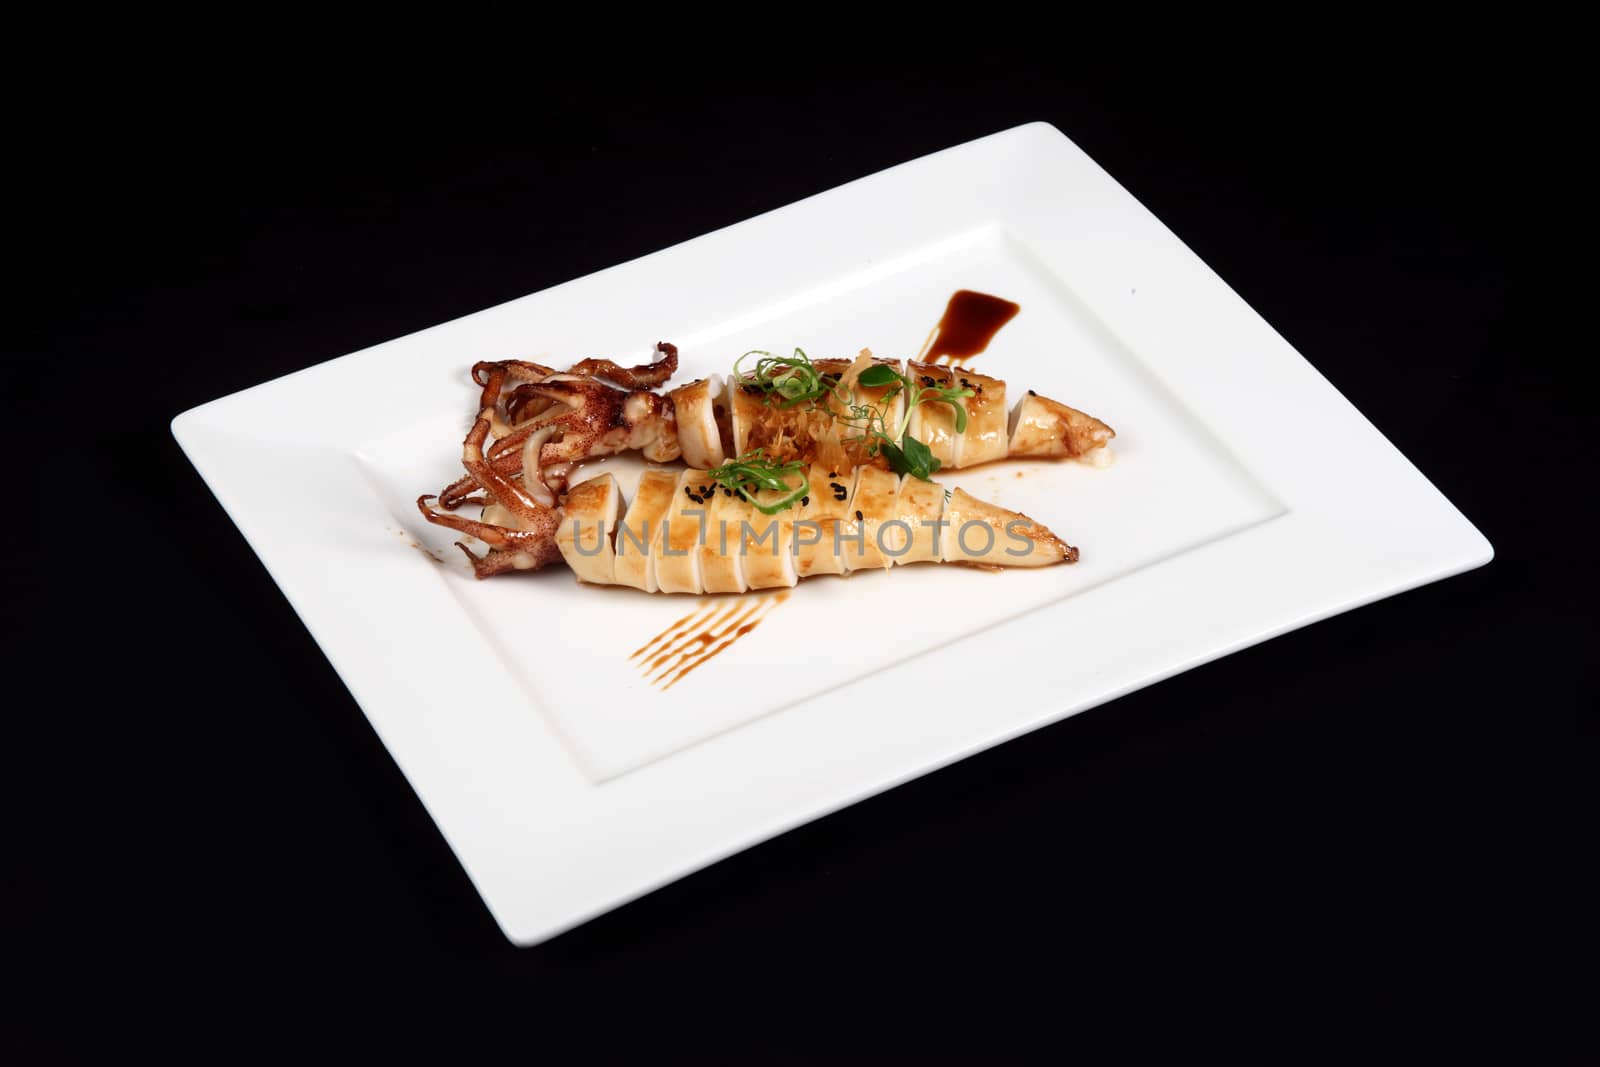 grilled squid with decoration of vegetables in white plate on a black background